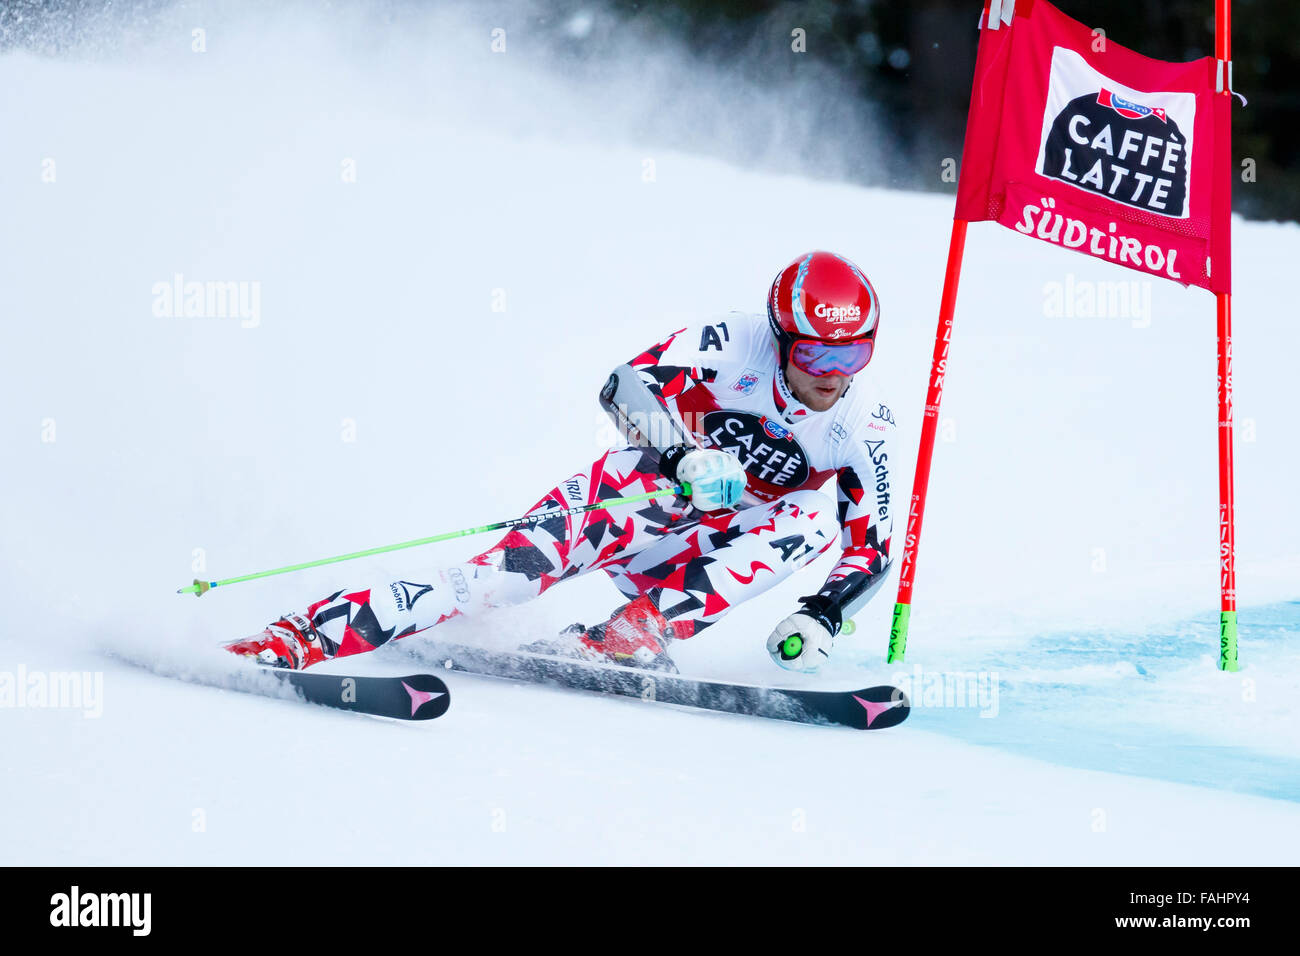 Alta Badia, Italy 20 December 2015.  SCHWARZ Marco (Aut) competing in the Audi Fis Alpine Skiing World Cup Men’s Giant Slalom Stock Photo